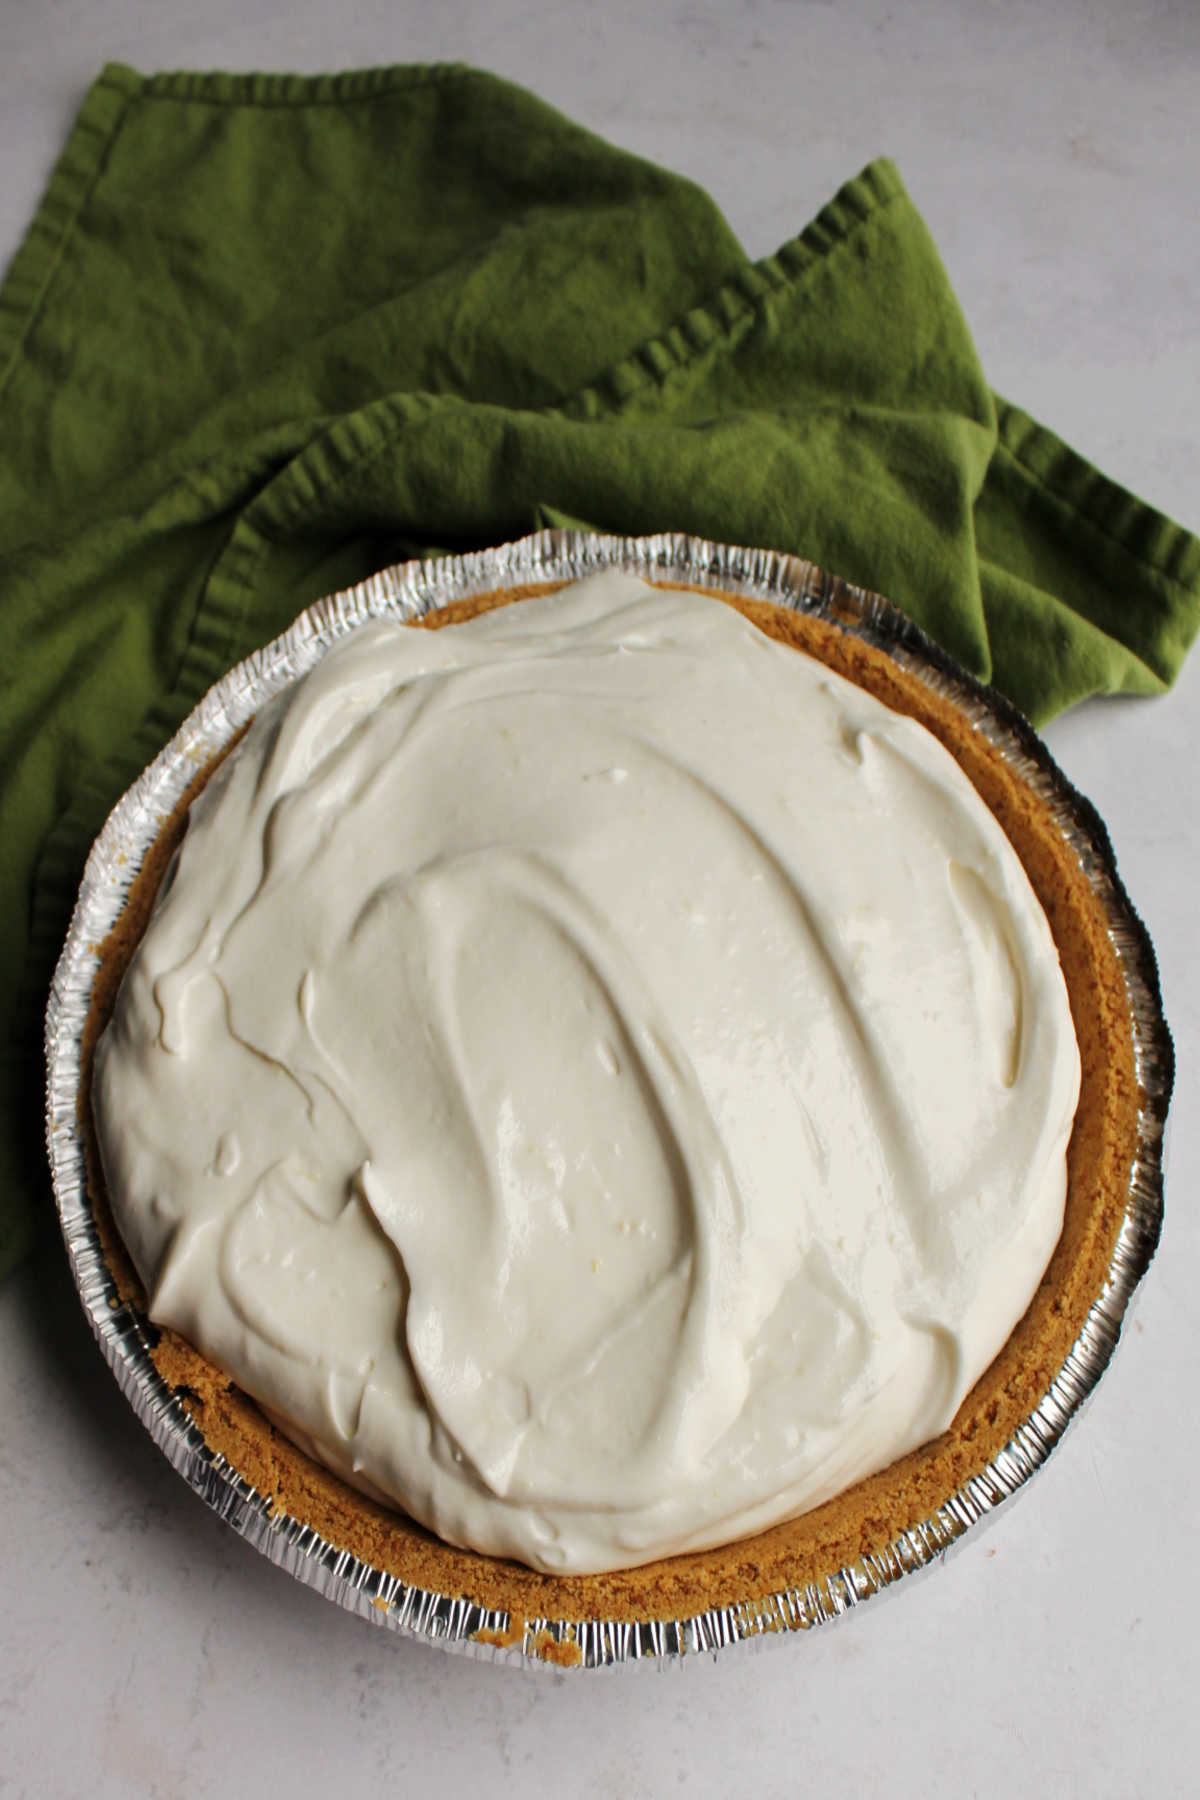 Whole creamy lemon pie, ready to be cut and served.